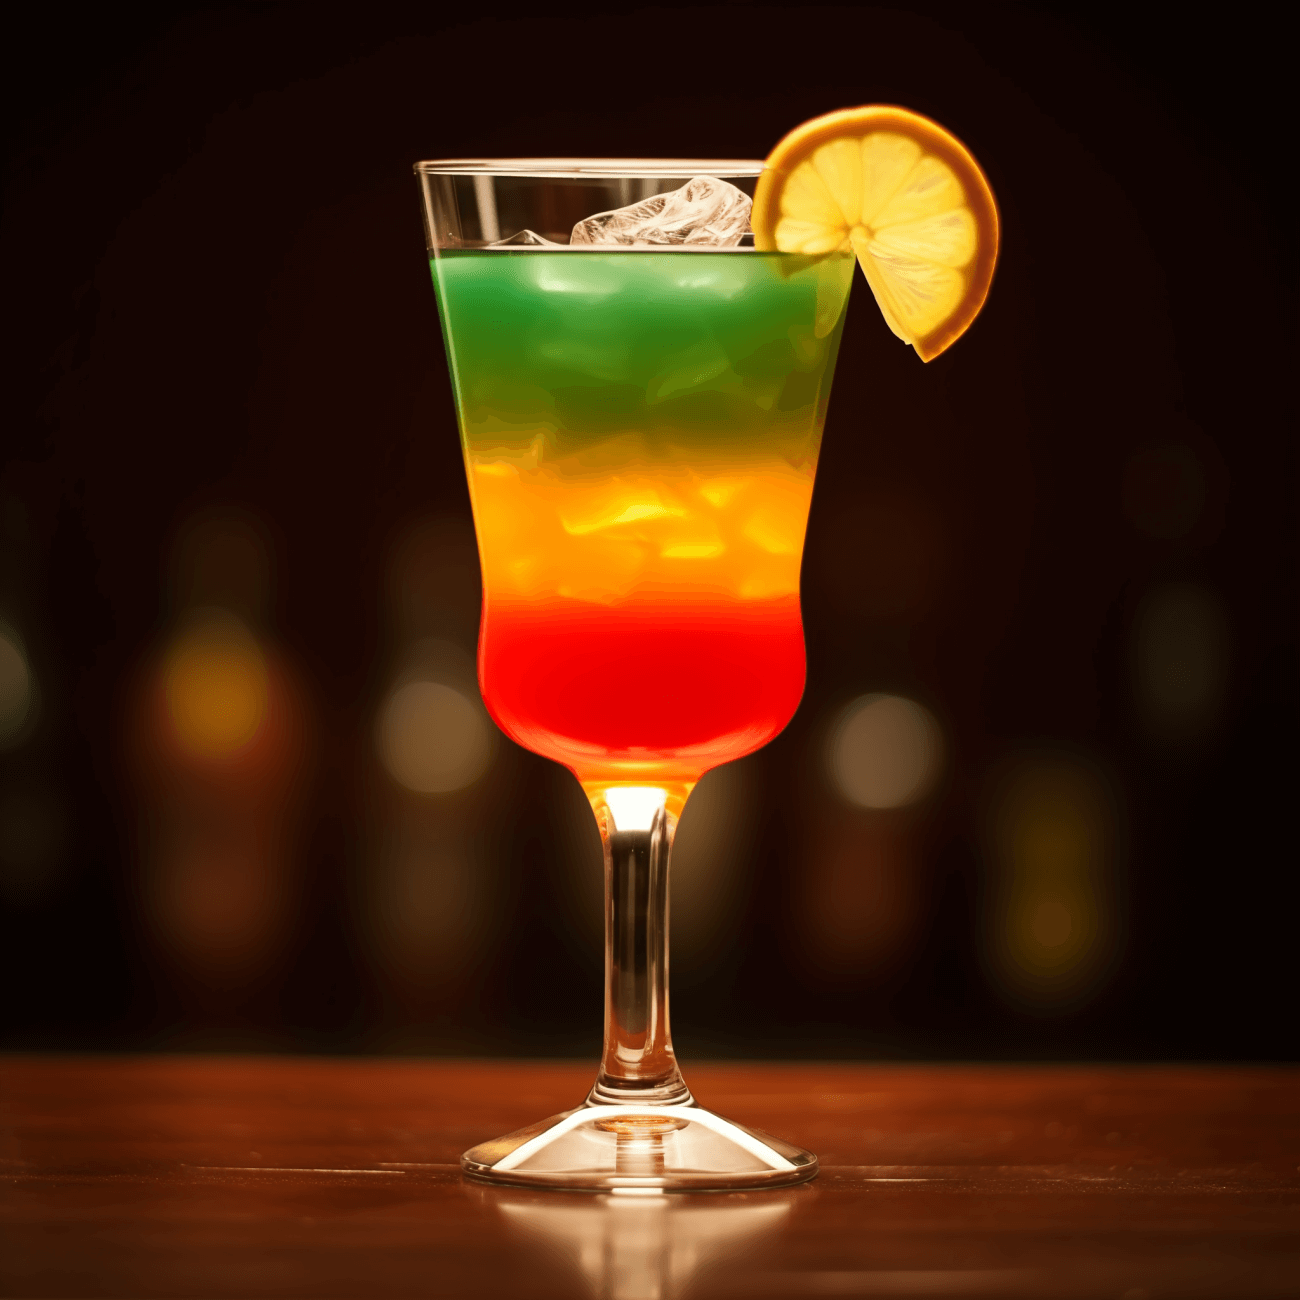 Machu Picchu Cocktail Recipe - The Machu Picchu cocktail is a delightful balance of sweet and sour, with a hint of minty freshness. The Pisco provides a strong, fruity base, while the grenadine adds a sweet touch. The orange juice brings a tangy twist, and the mint leaves a refreshing aftertaste.